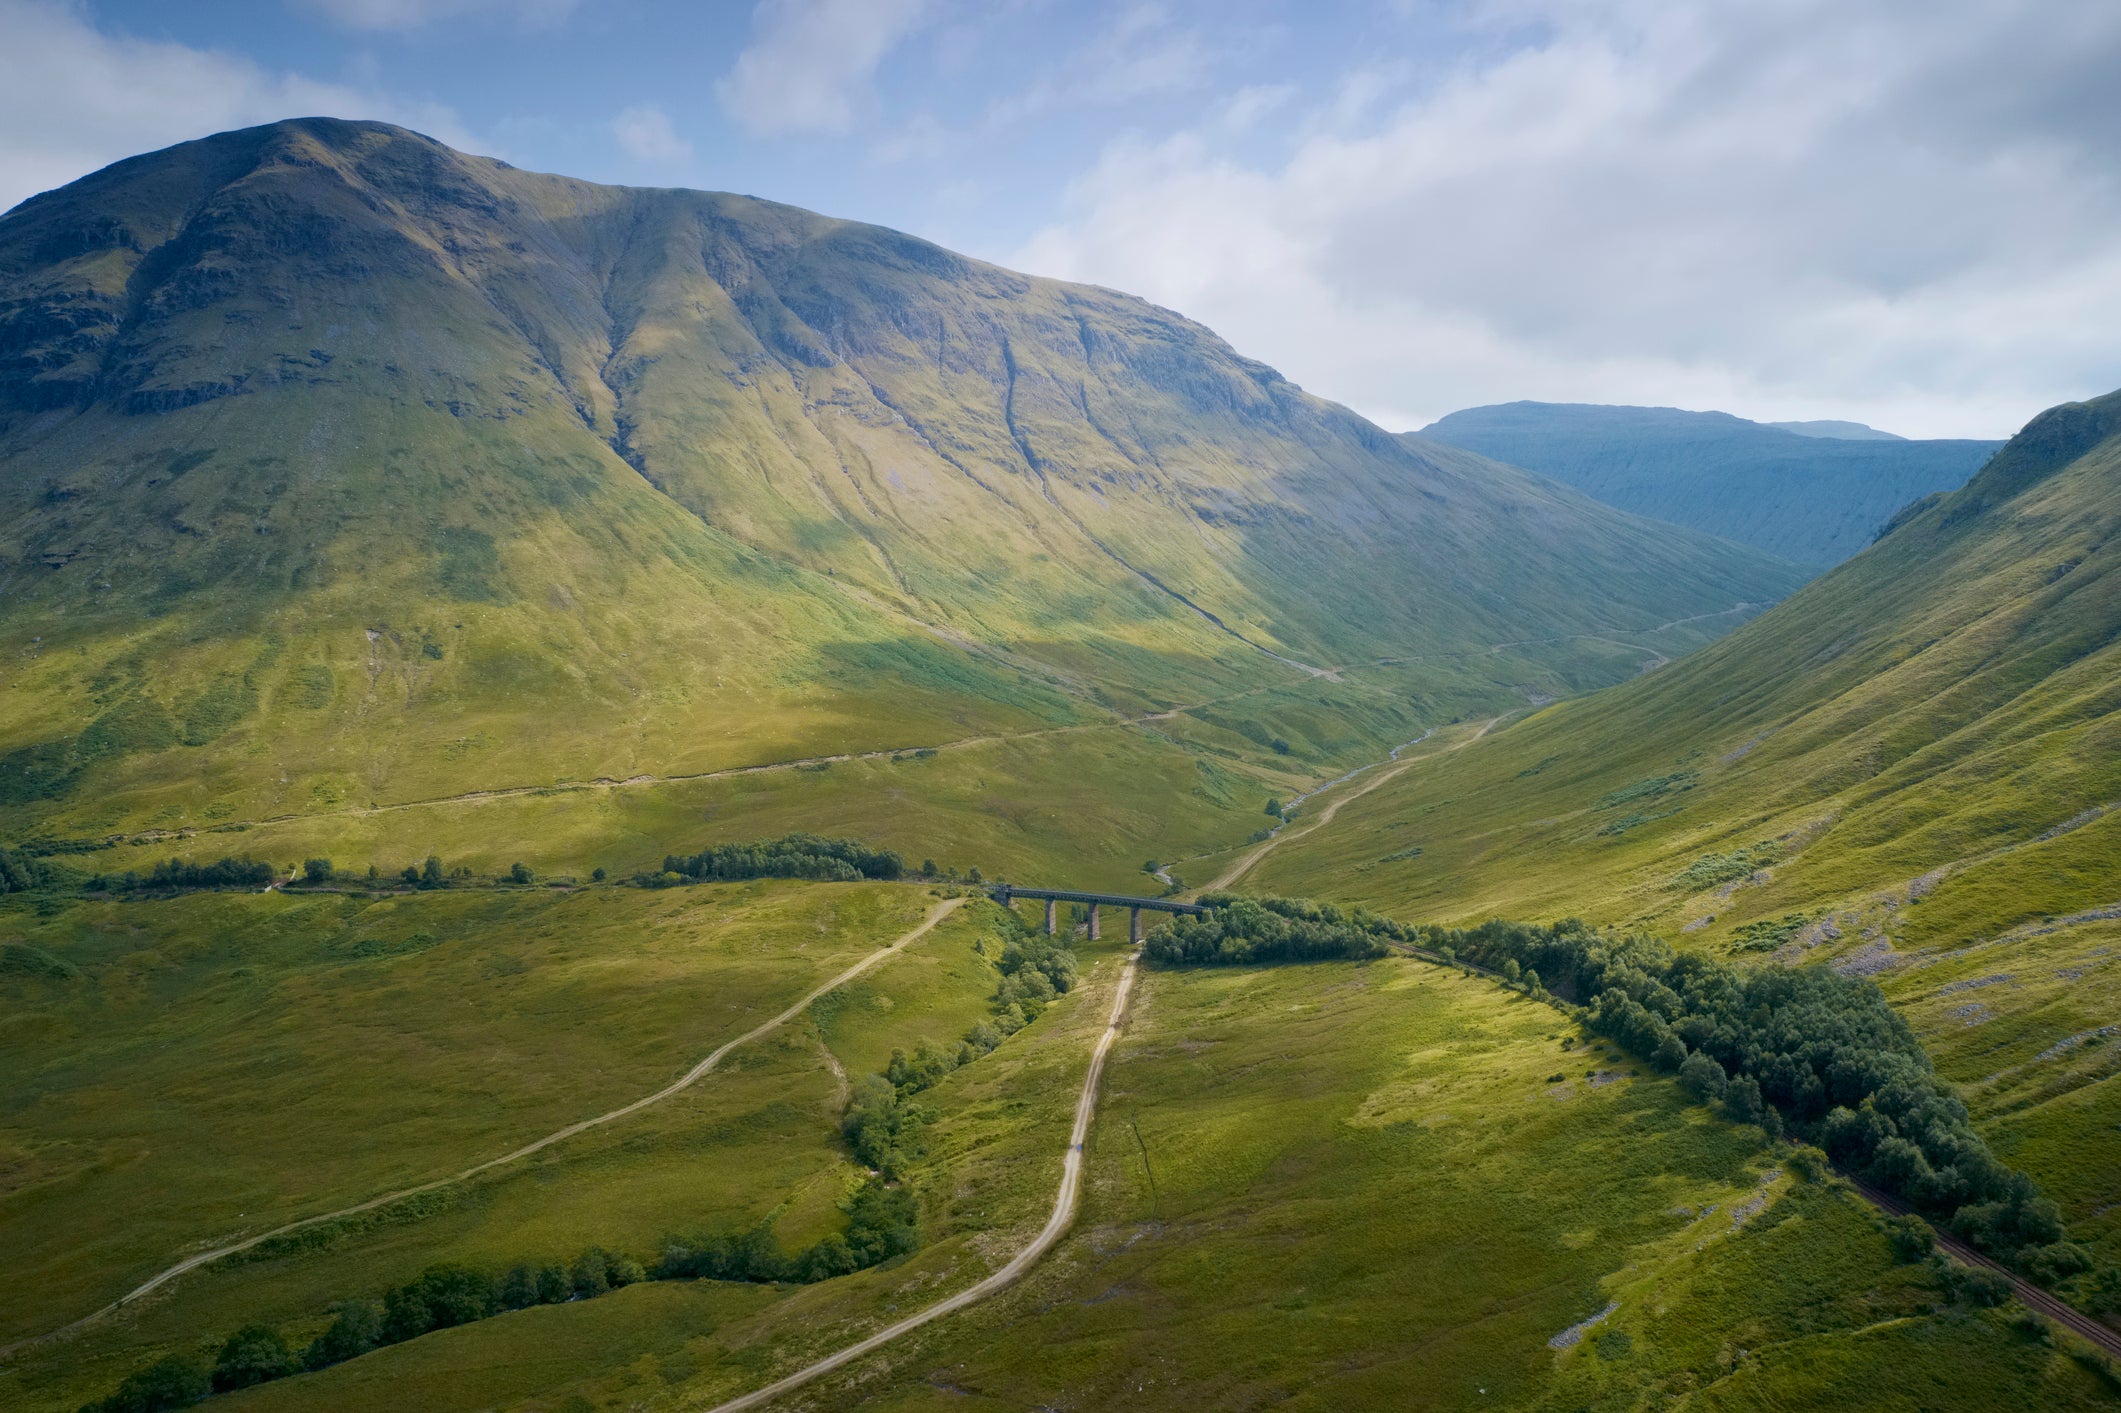 Wild landscapes blanket the 96-mile West Highland Way from Milngavie to Fort William